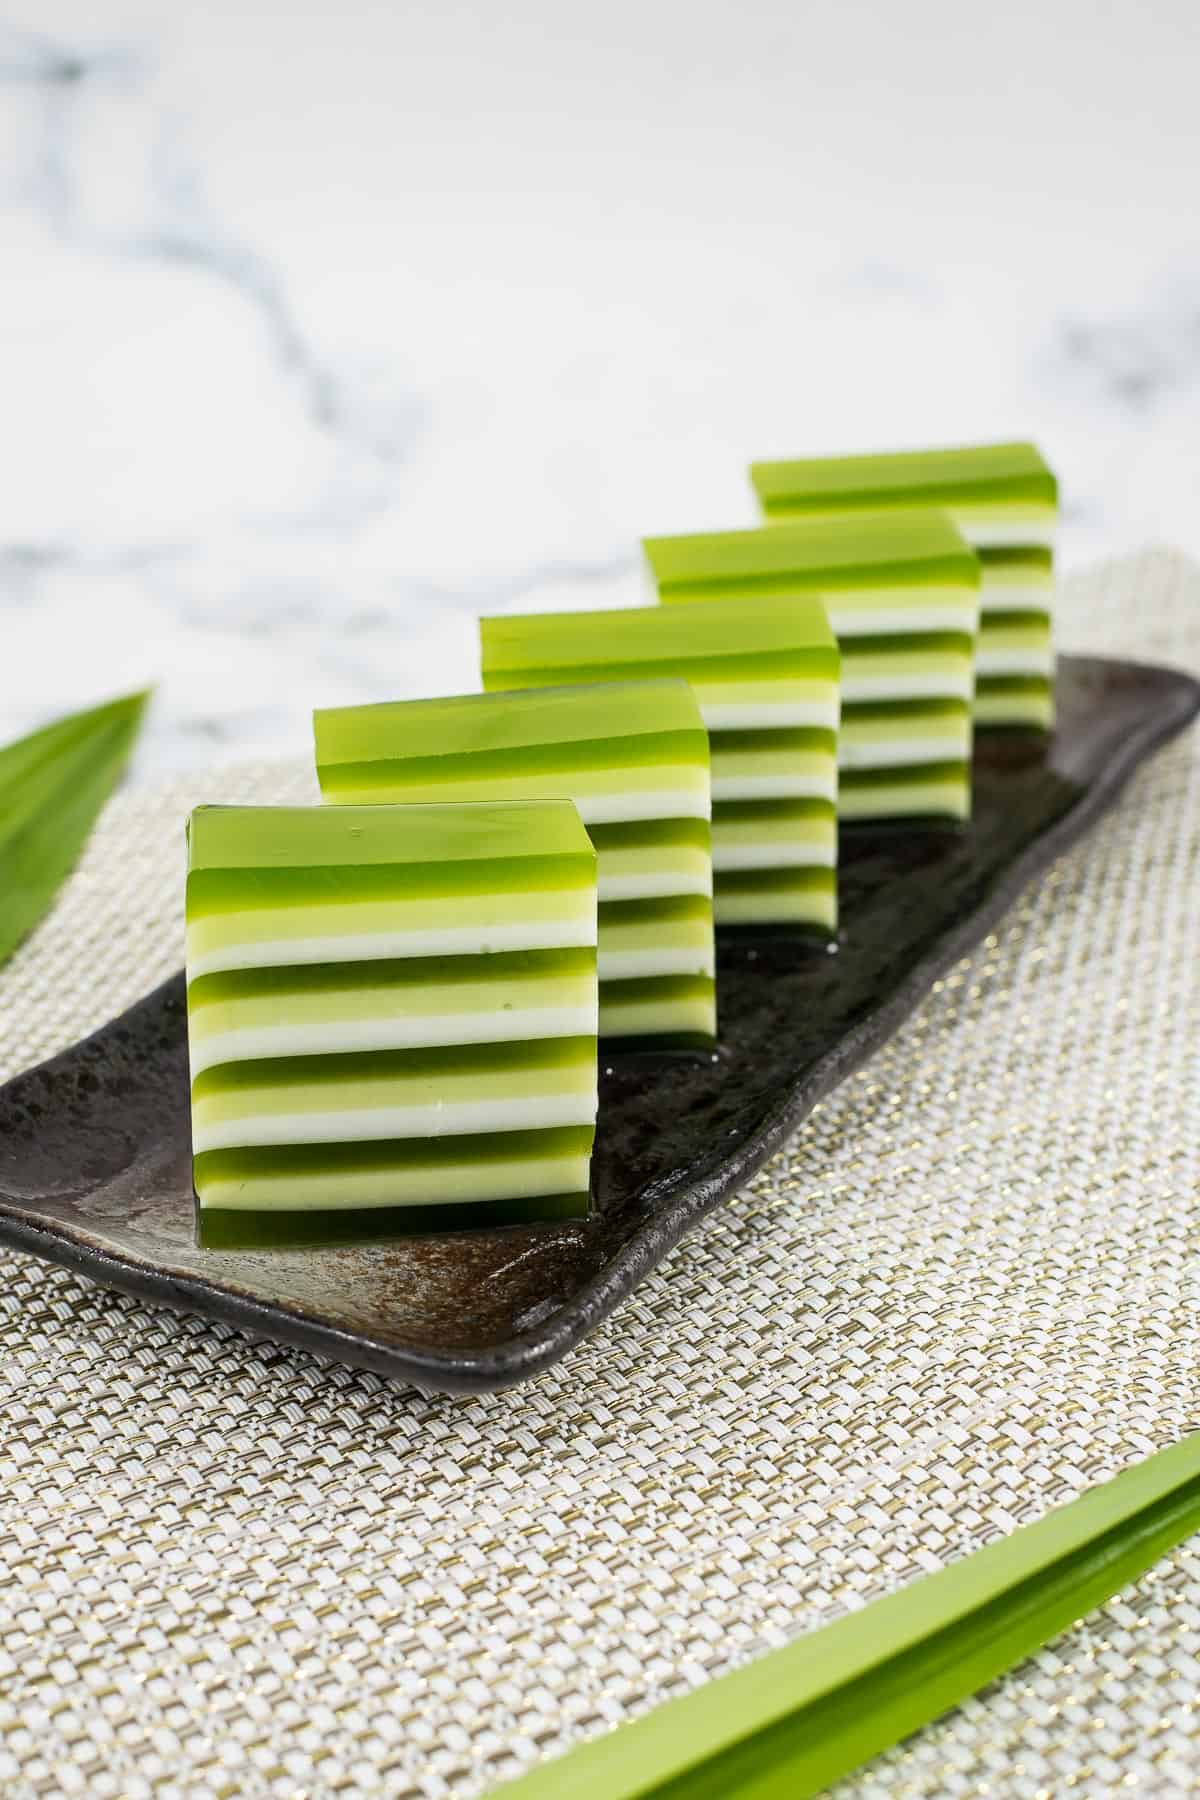 Green and white layered jelly cut into pieces and arranged on a brown rectangle plate.